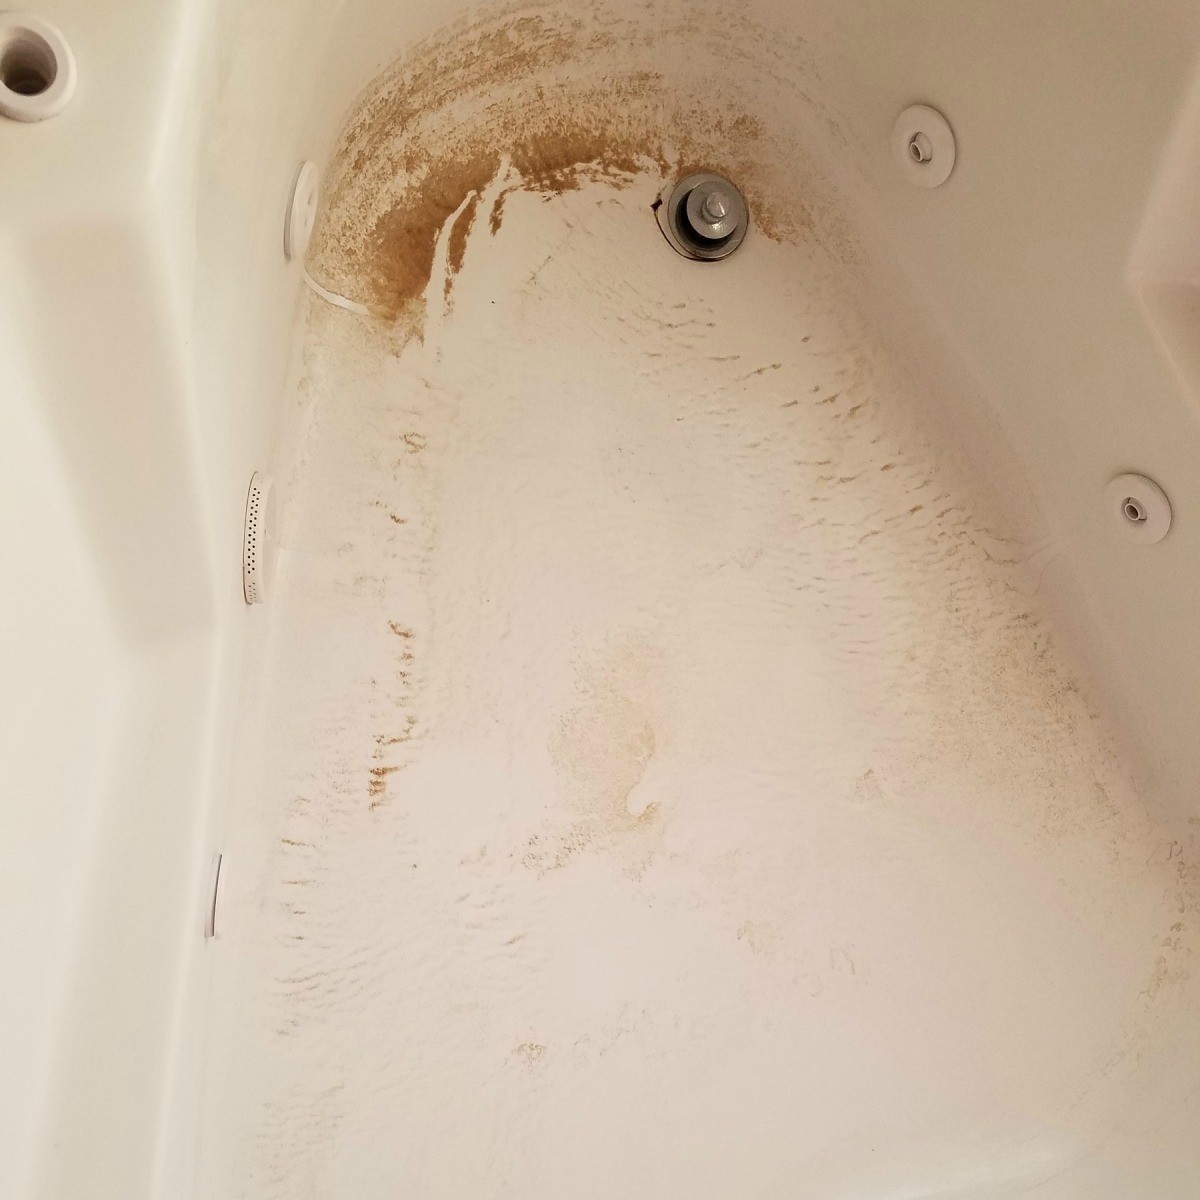 Jacuzzi Bathtub Has Sand In Water Pipes, How To Clean Whirlpool Bathtub Jets